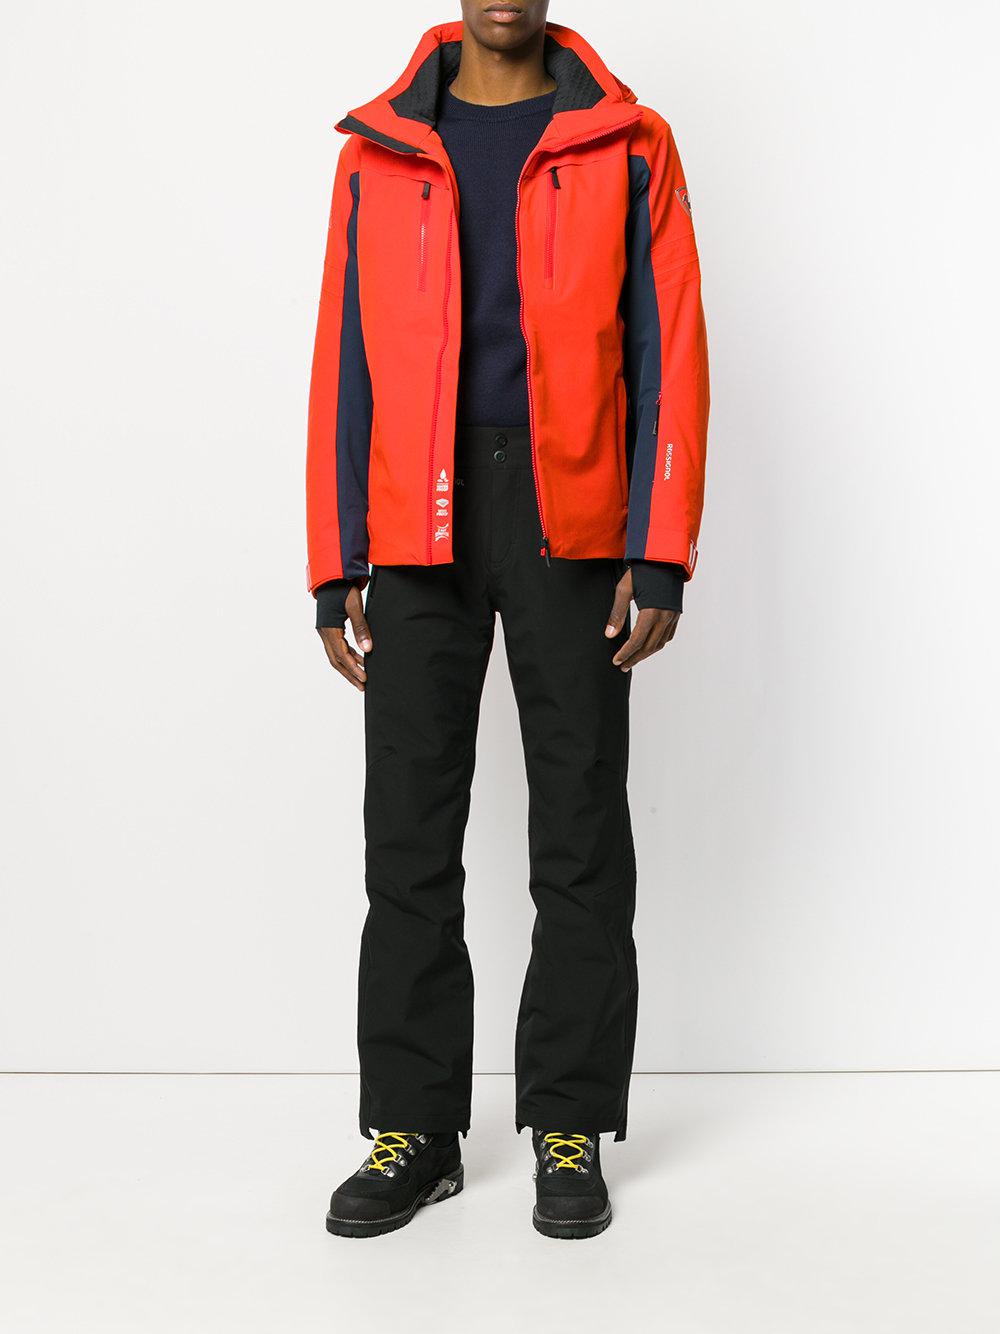 Lyst - Rossignol Course Jacket in Red for Men